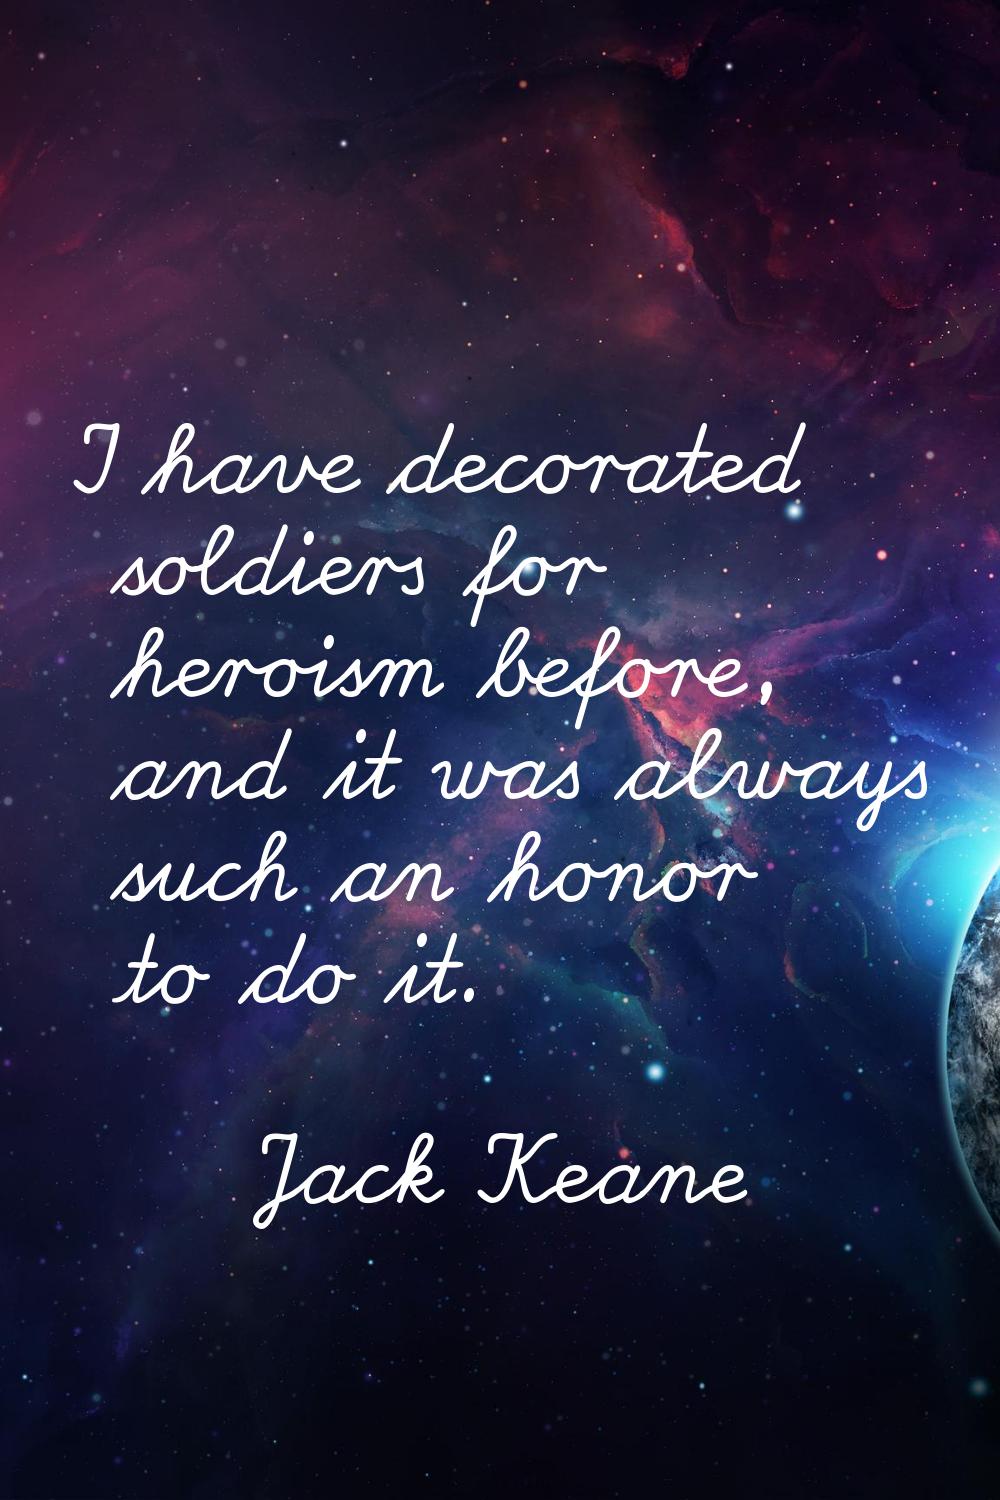 I have decorated soldiers for heroism before, and it was always such an honor to do it.